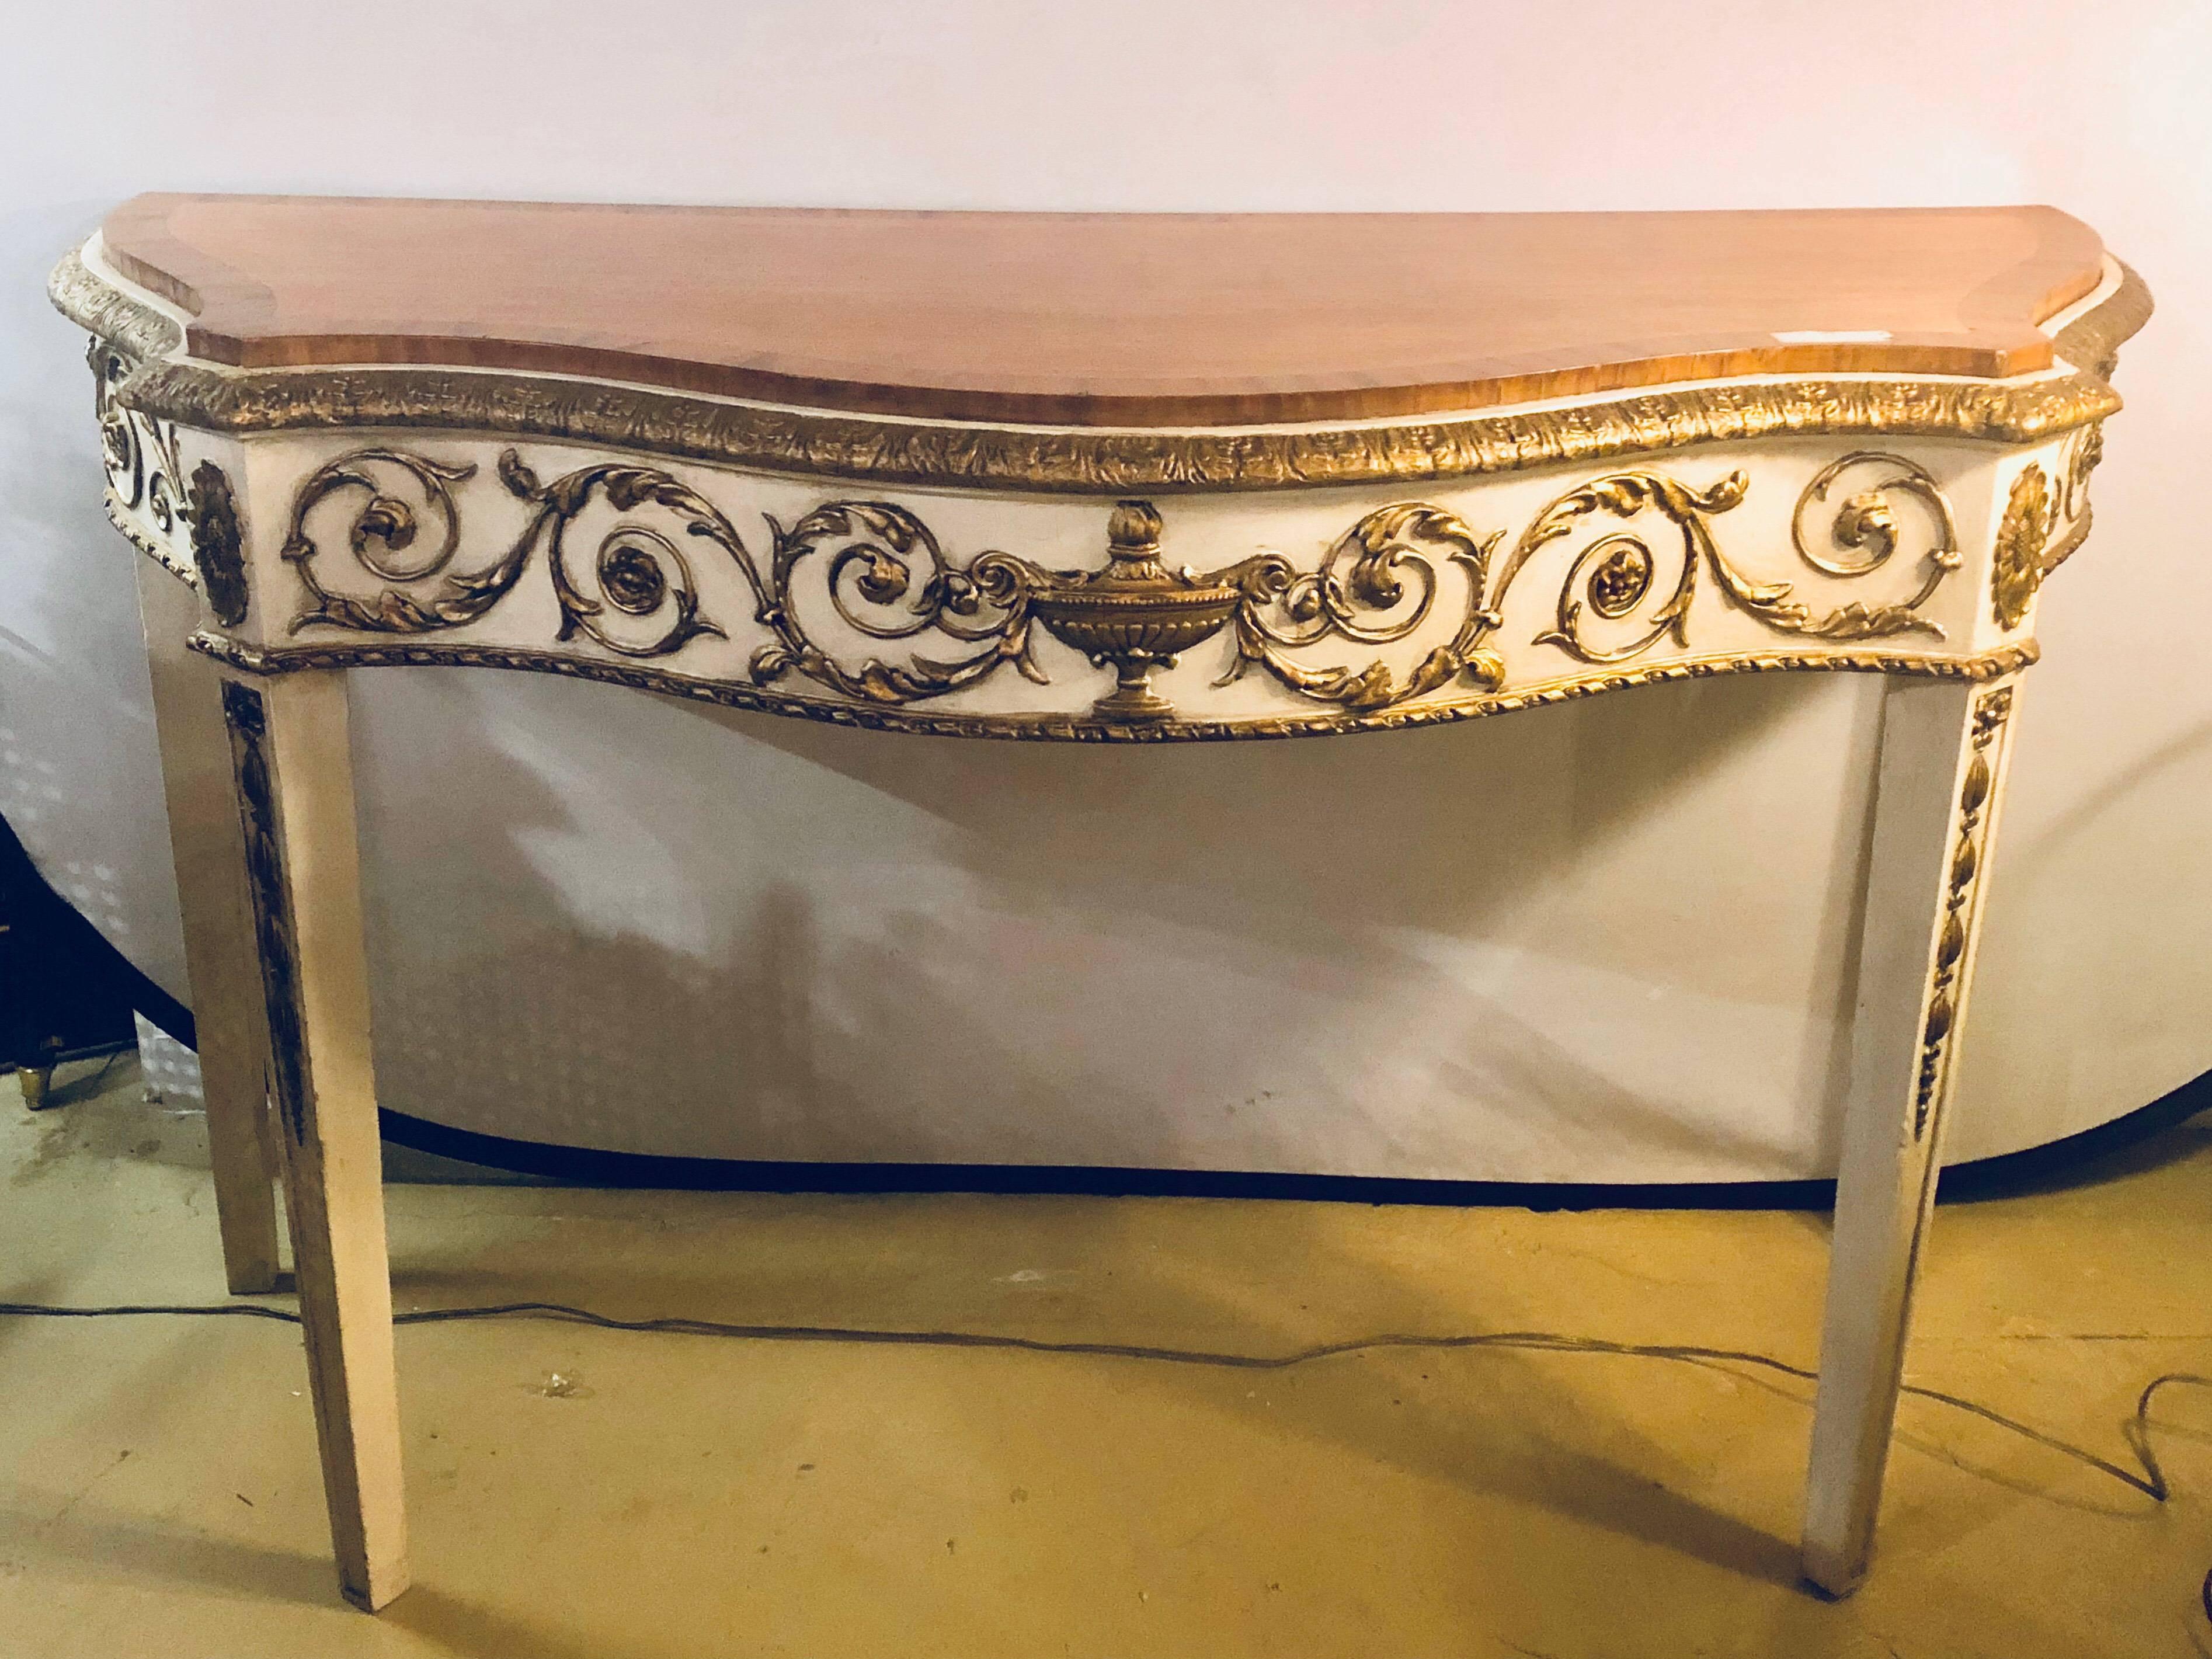 A painted console or demilune table fine wood top Louis XV style by Maison Jansen. Parcel-gilt and paint decorated with a banded walnut tabletop.